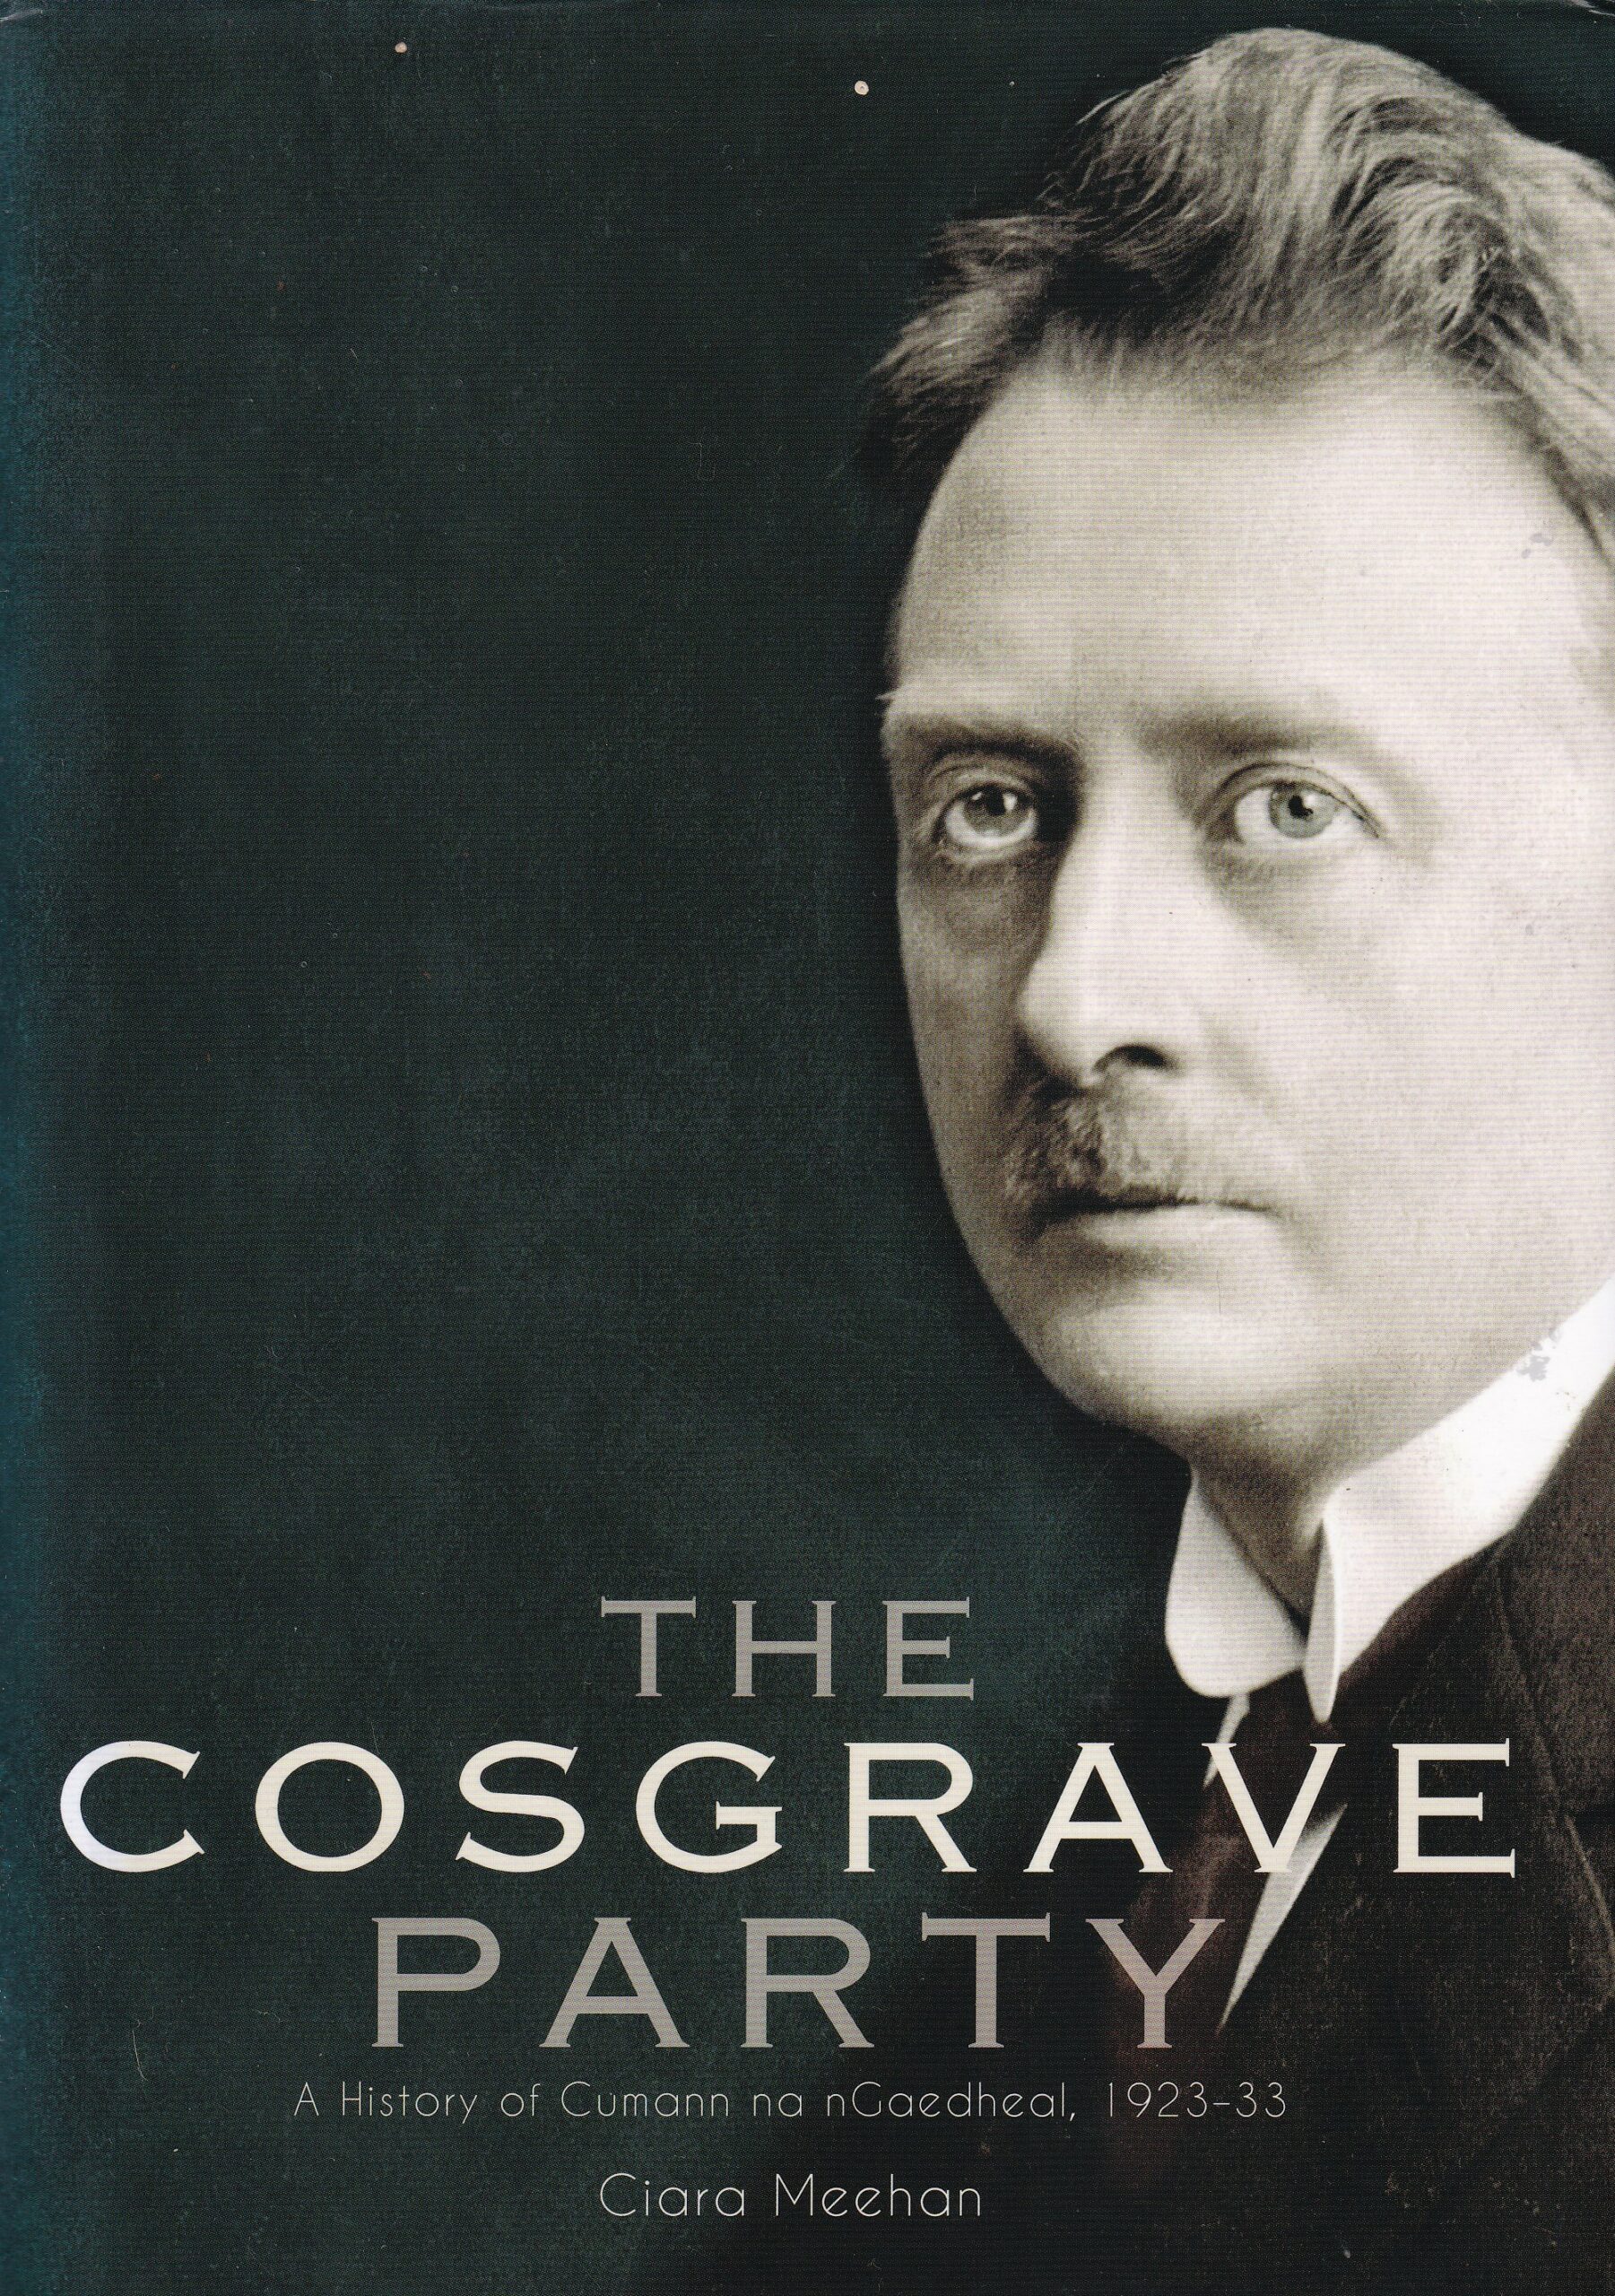 The Cosgrave Party: A History of Cumann na nGaedheal, 1923-33 | Ciara Meehan | Charlie Byrne's